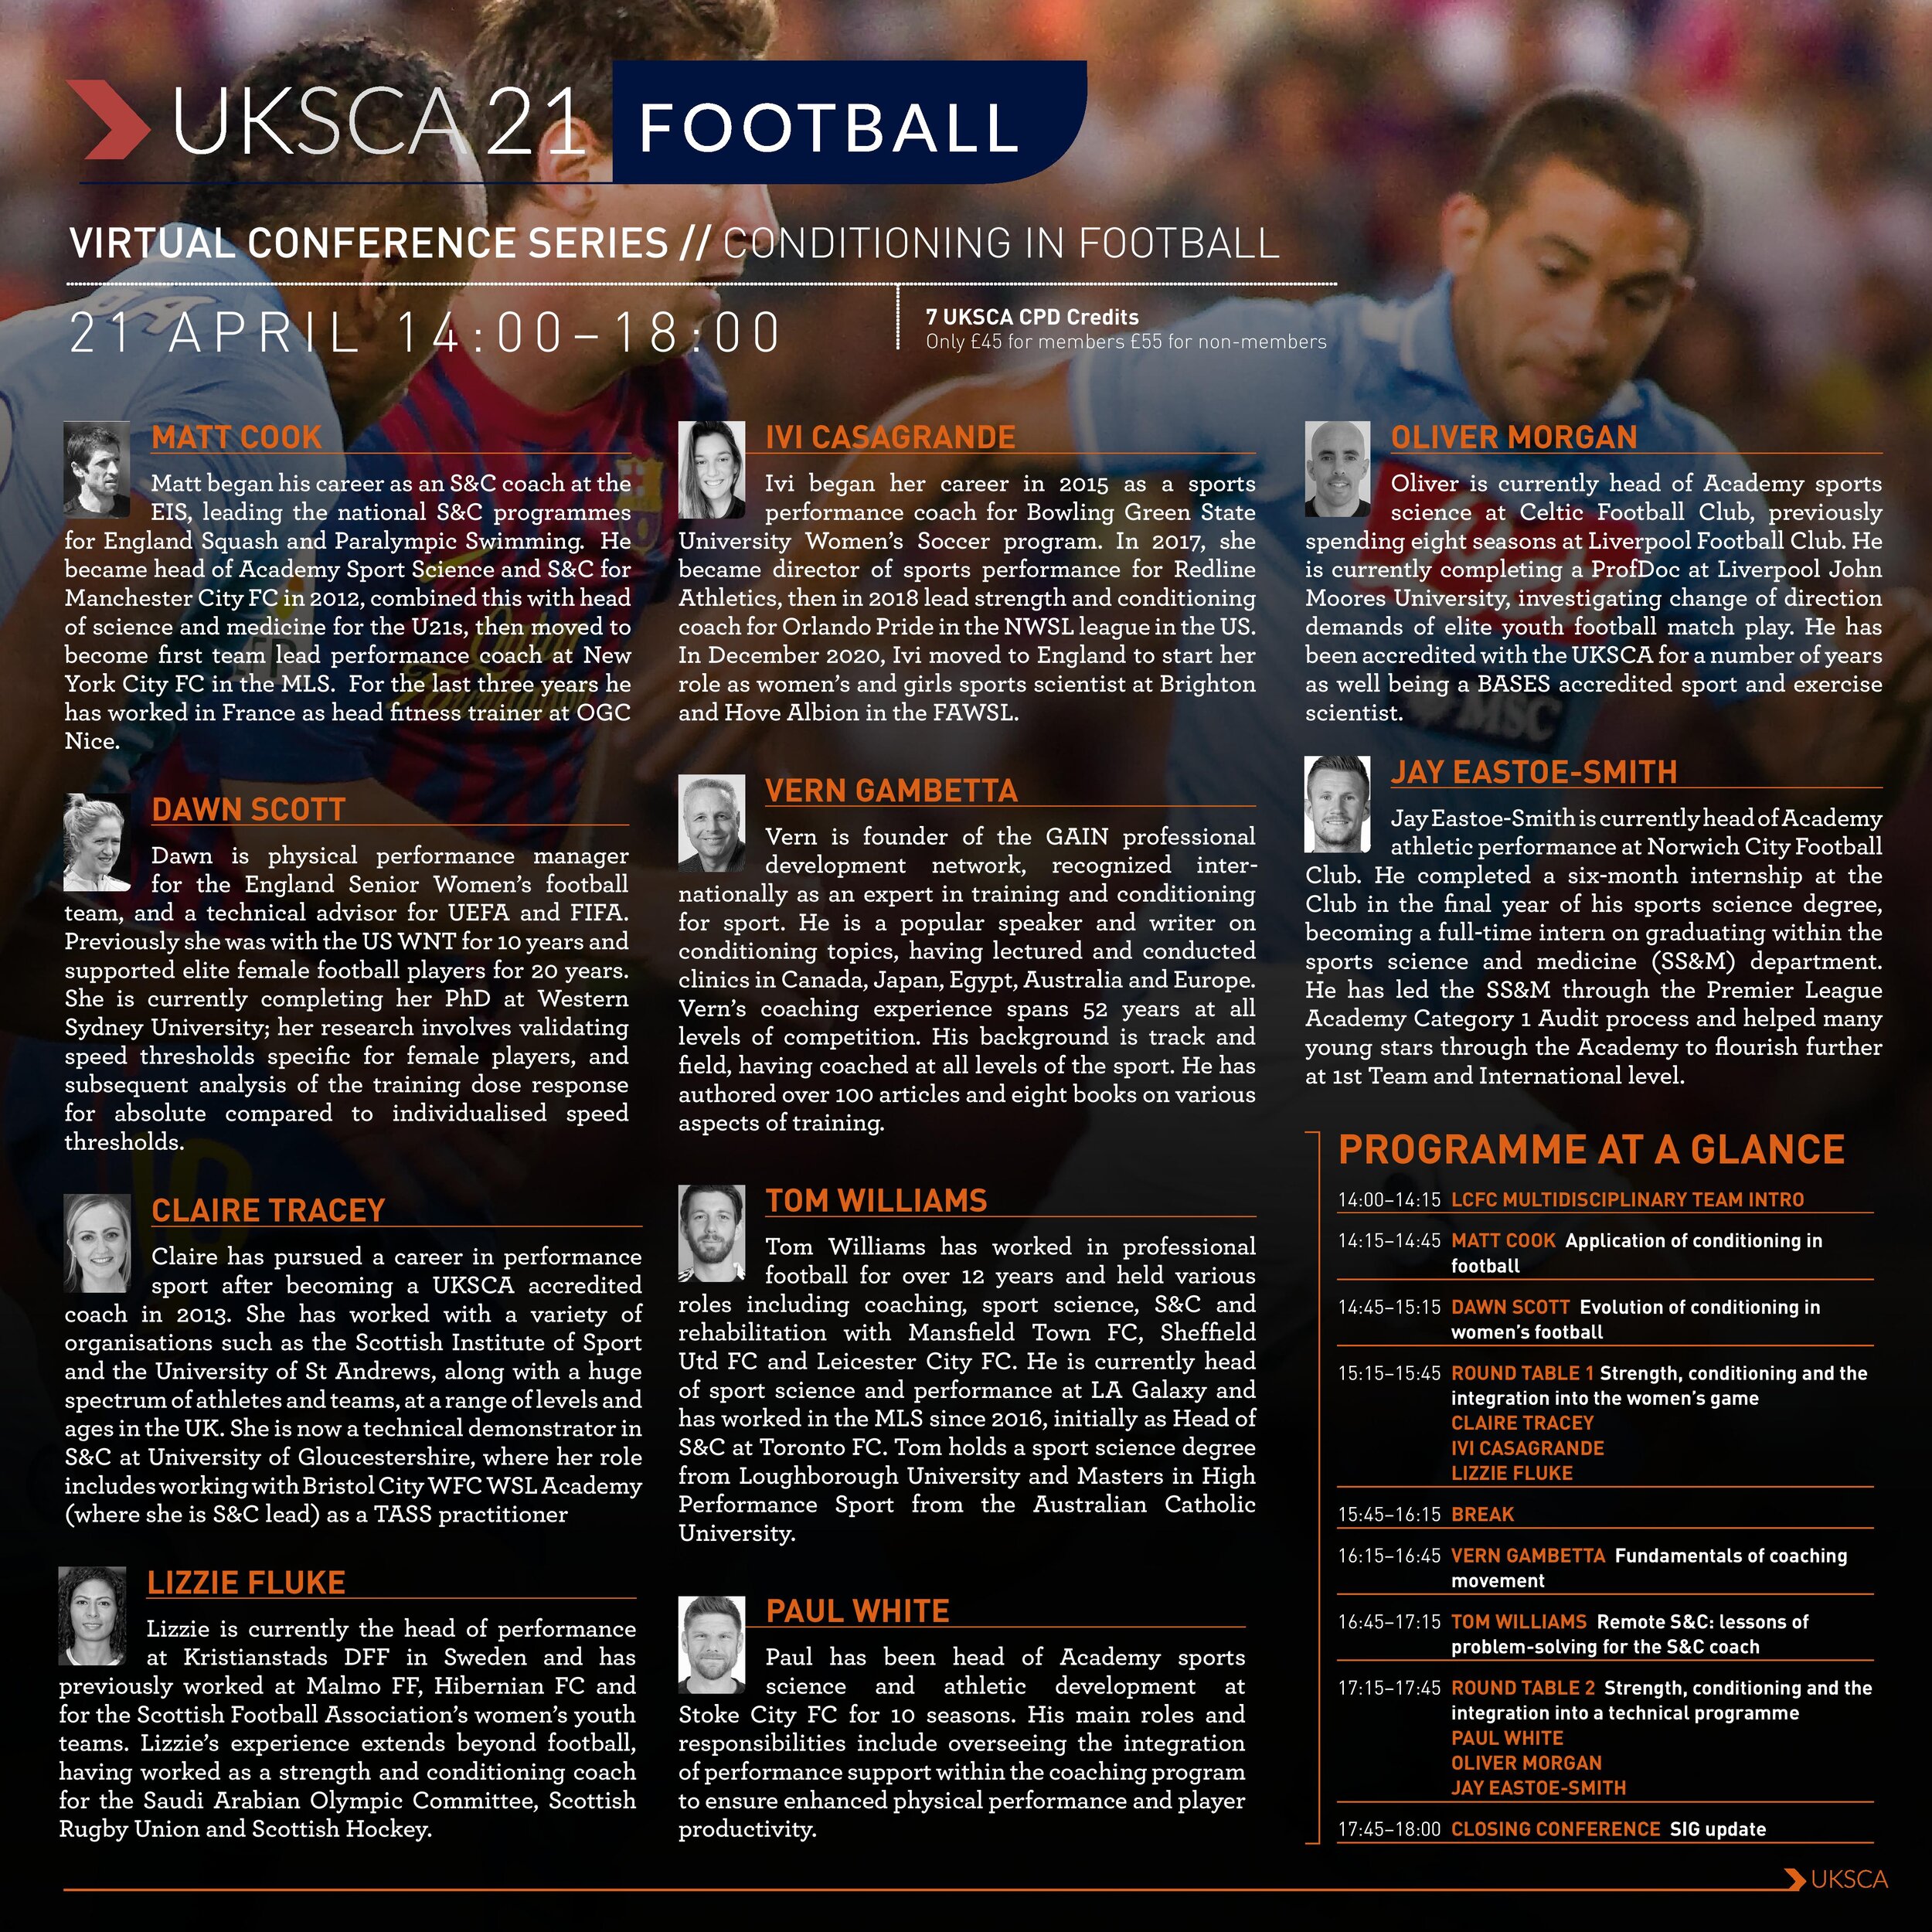 2021-virtual-conference-series-conditioning-in-football-programme-637541974468548106-page-002 (2).jpg